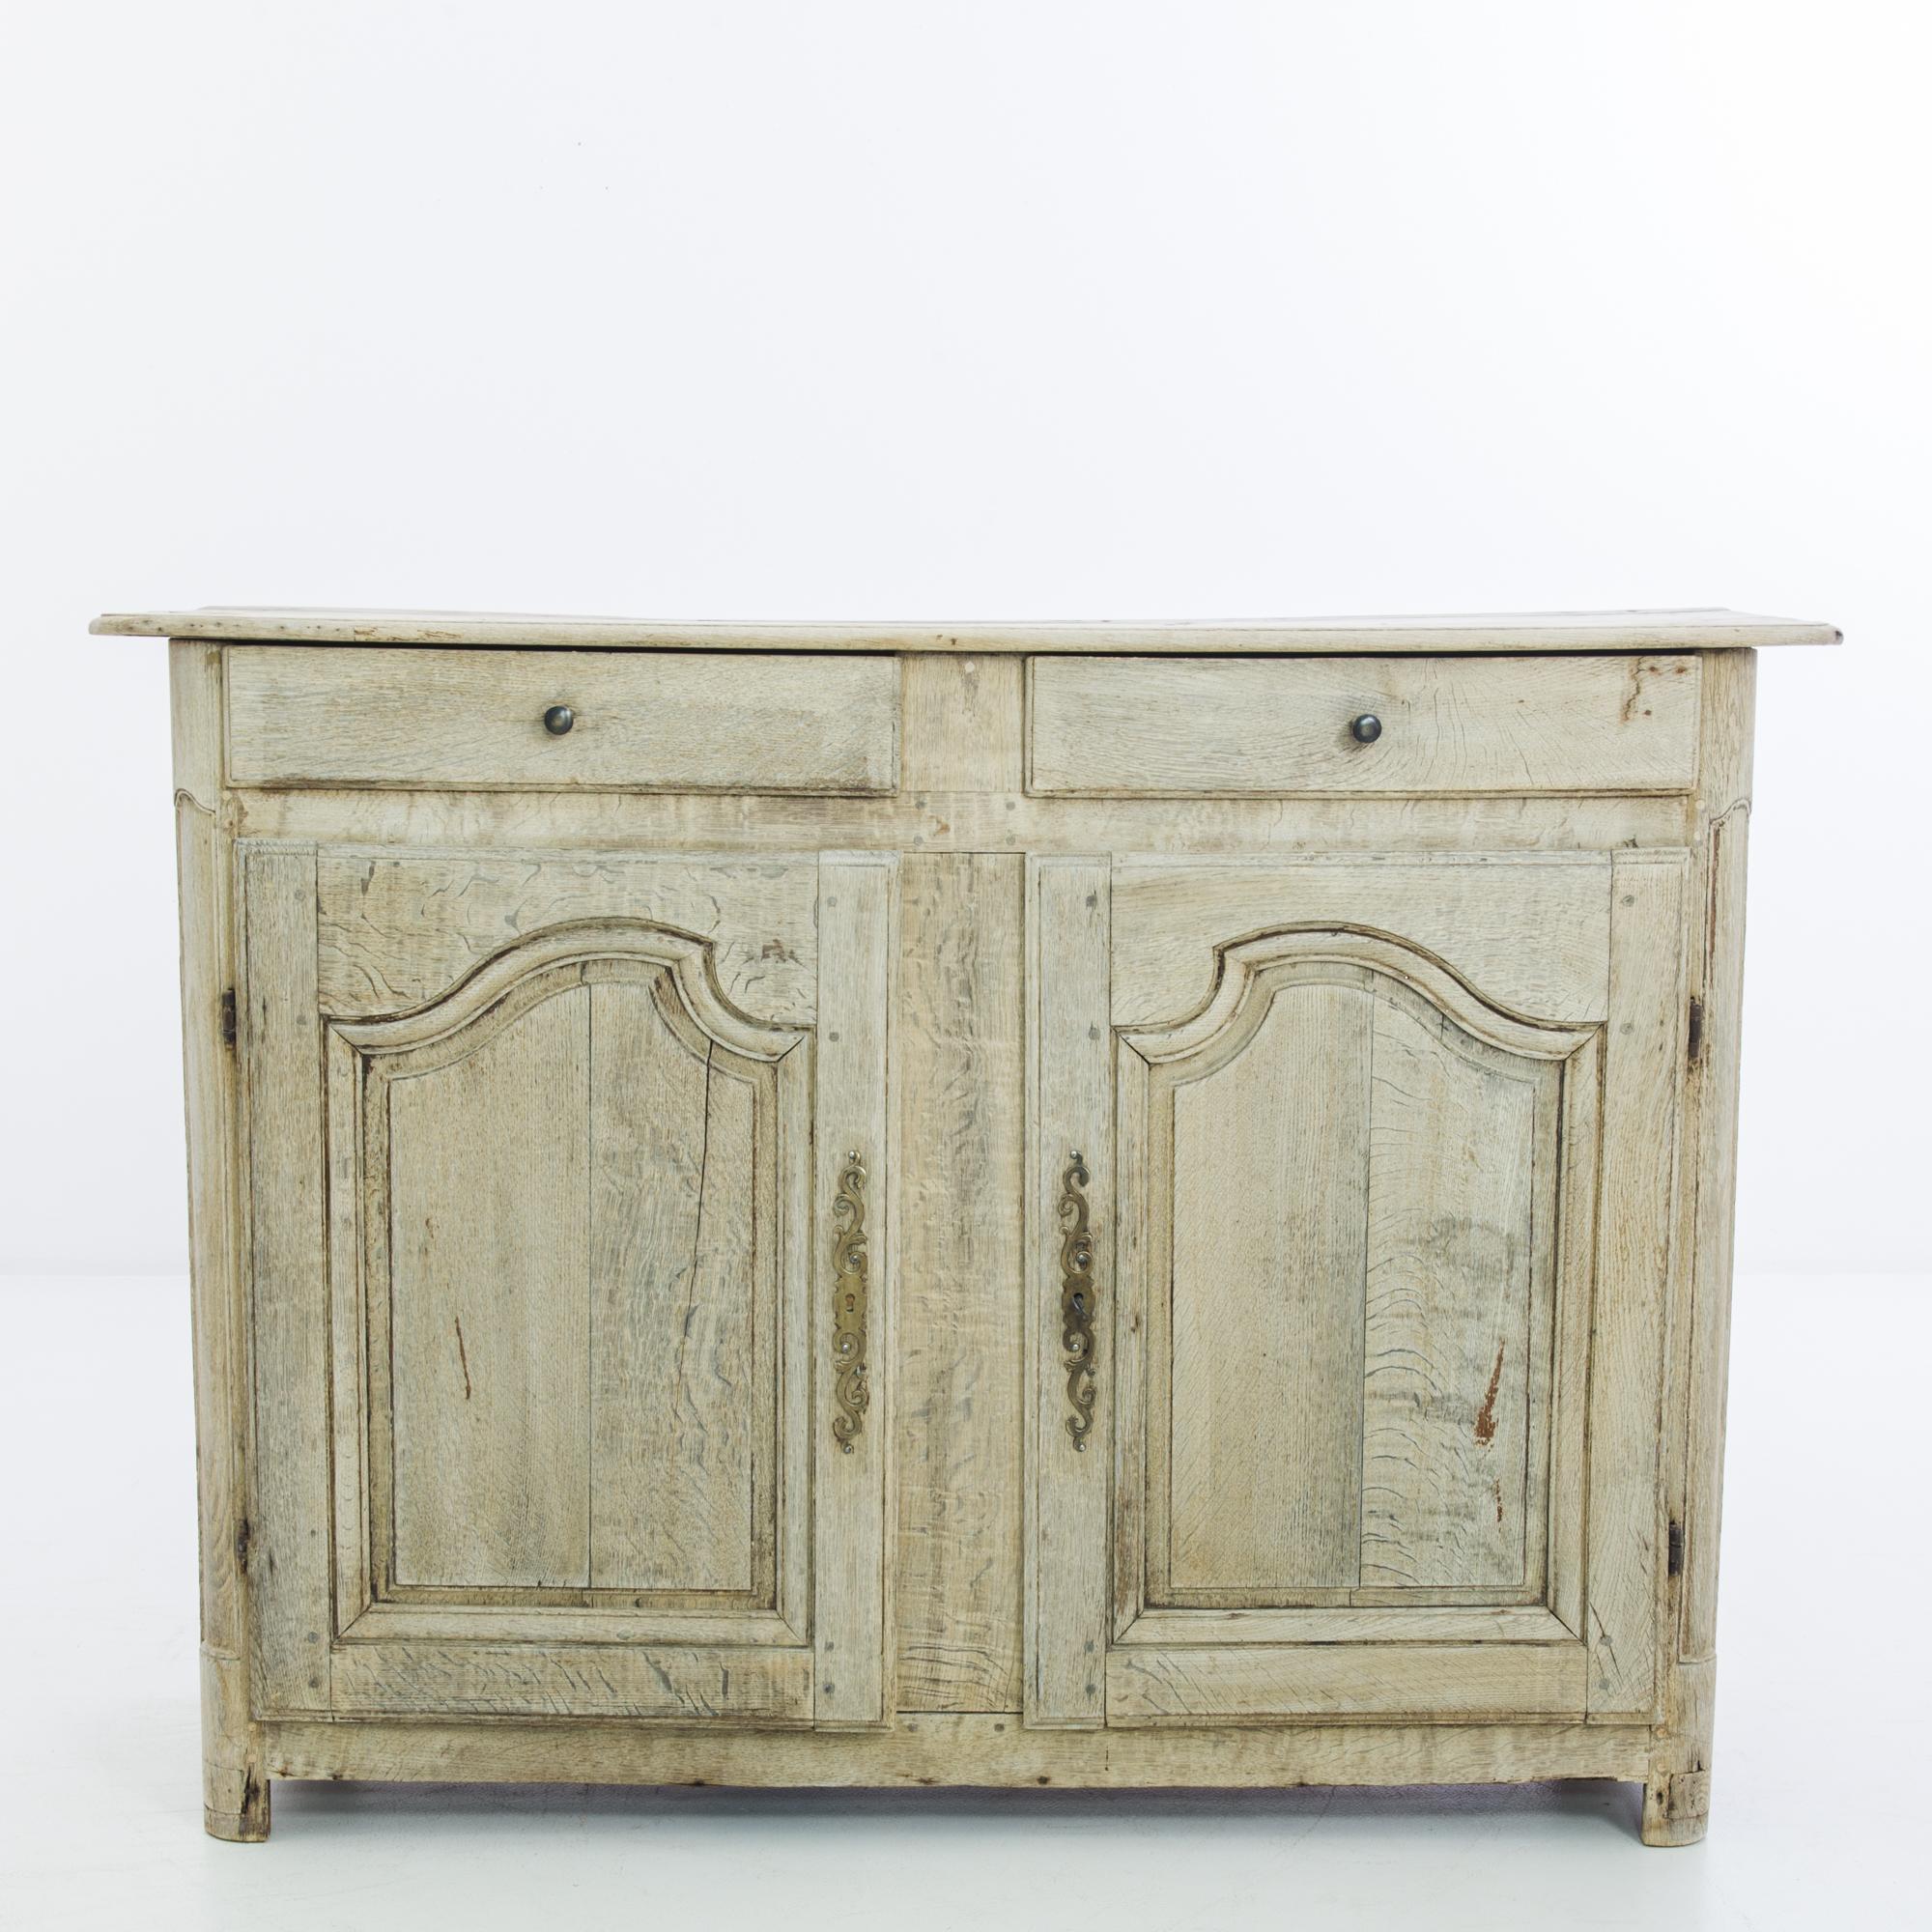 An oak buffet from Belgium, circa 1850. The upright frame is subtly embellished by the expressive swell of the paneling on the cupboard doors and the filigree of the gilded lock pieces. The wood has been restored in our workshops to a pale, natural